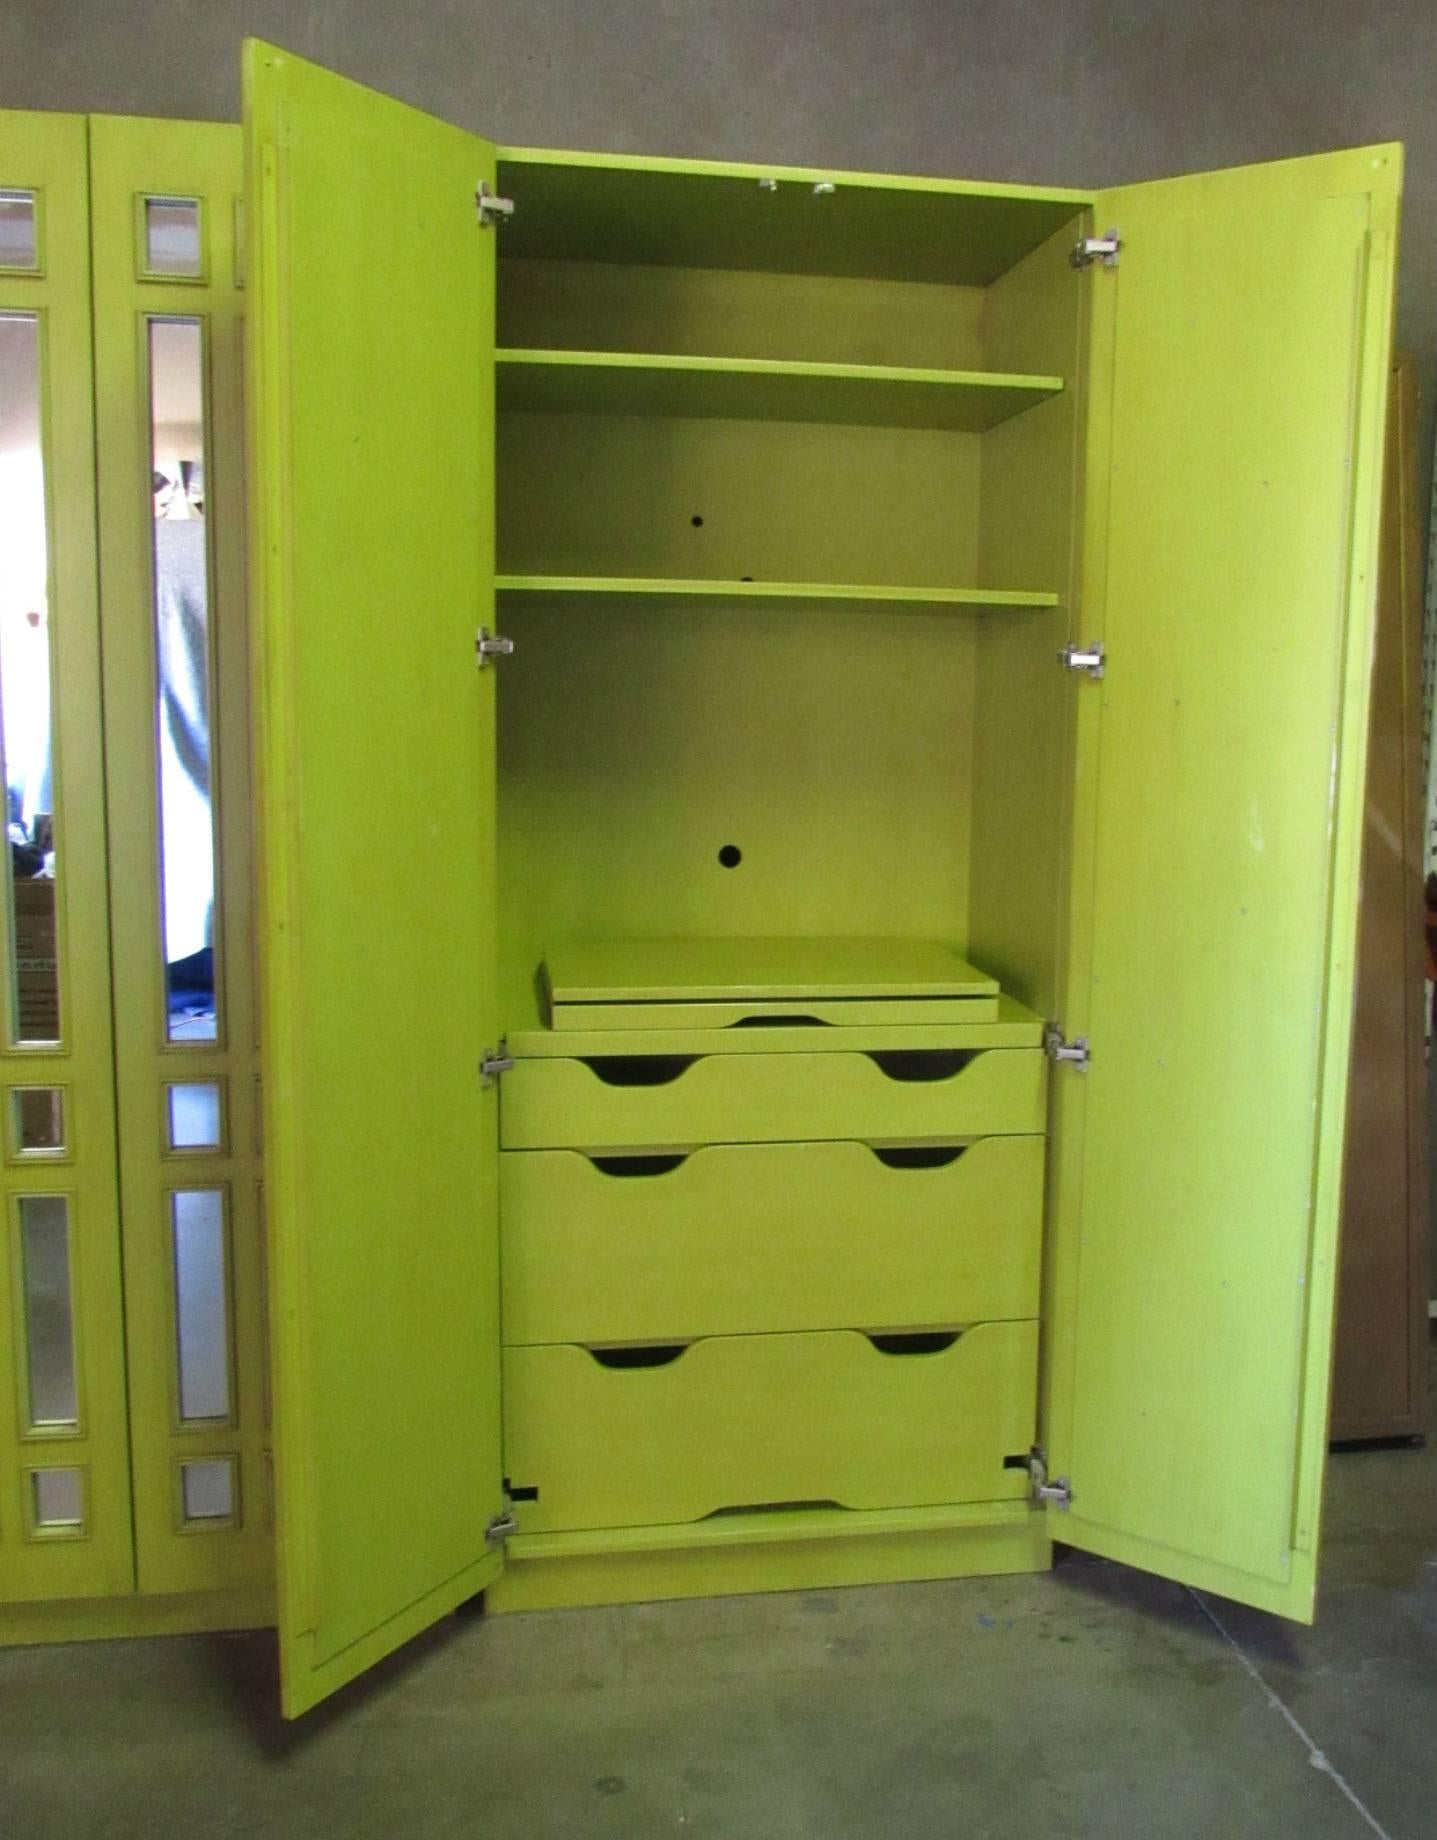 American Pair of Mirrored Wardrobe Armoires in Mod Pop Lime Green Lacquer, circa 1970s